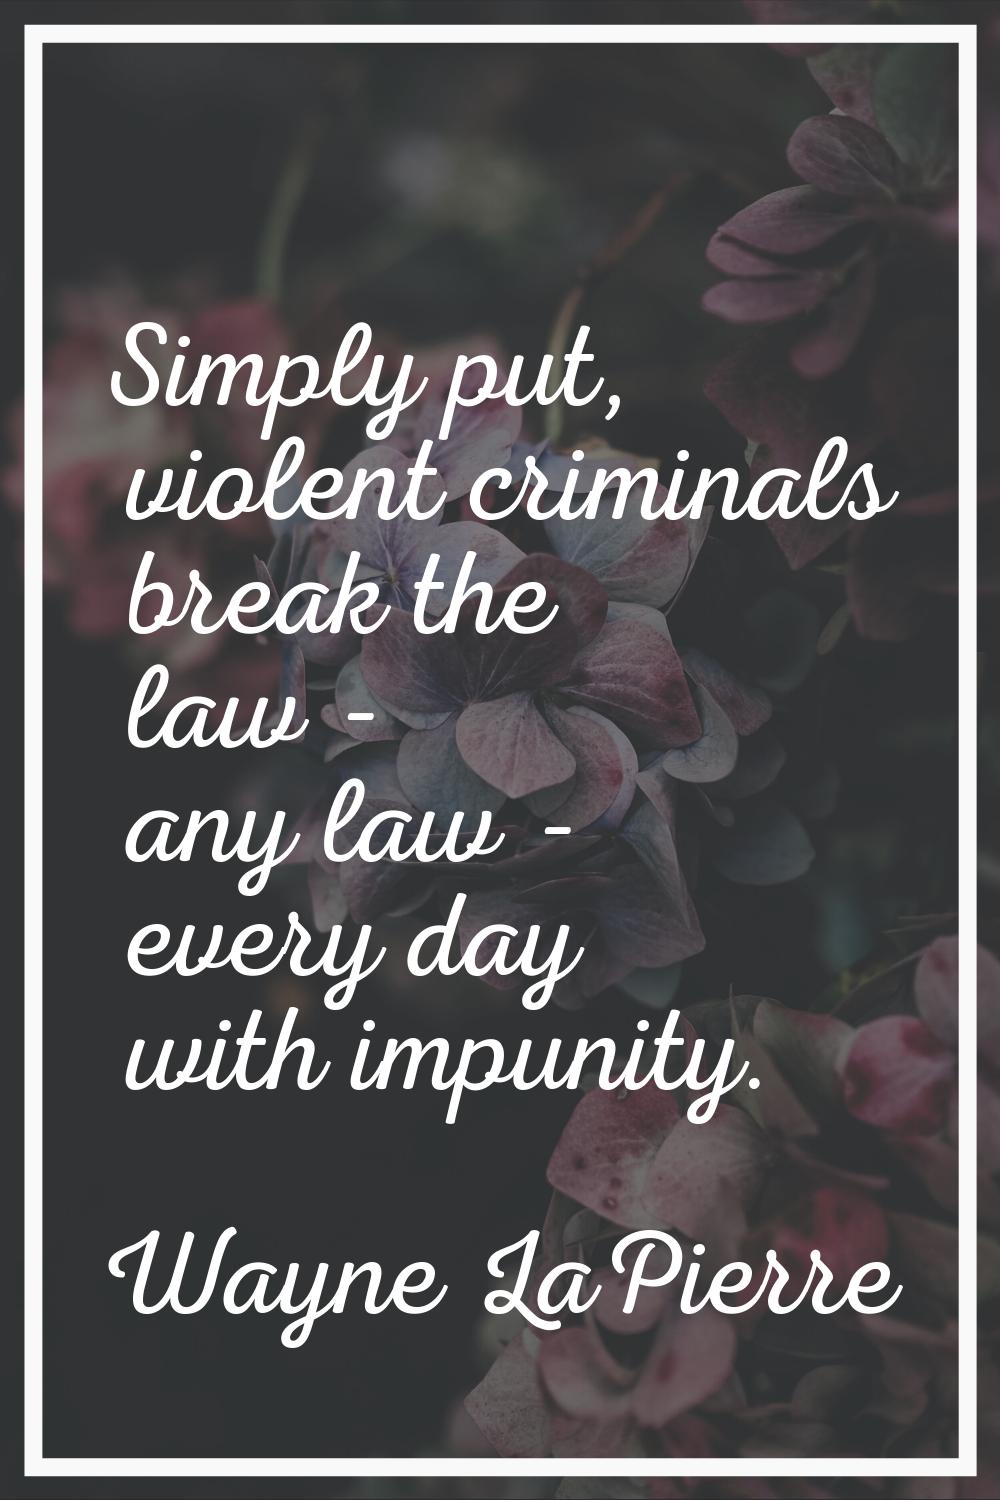 Simply put, violent criminals break the law - any law - every day with impunity.